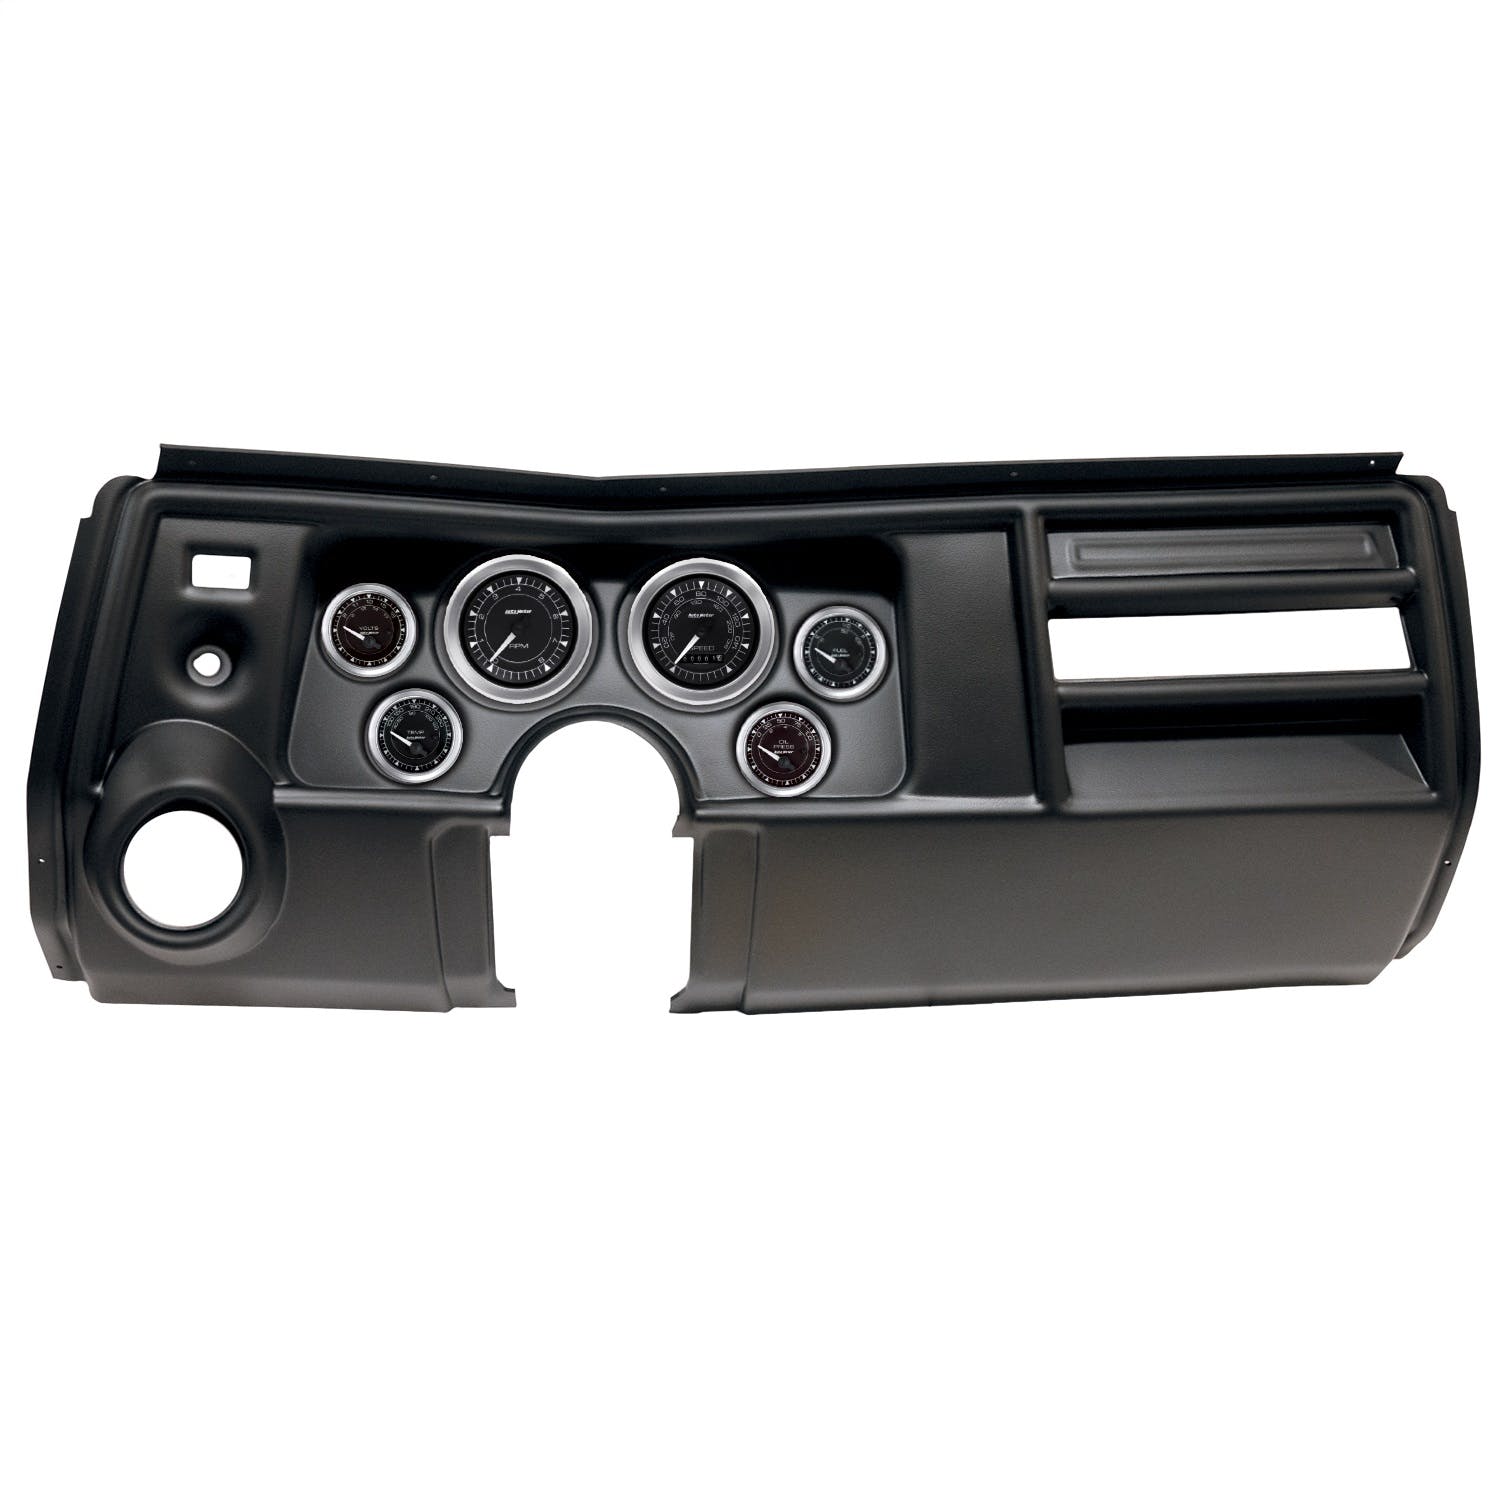 AutoMeter Products 2909-04 6 Gauge Direct-Fit Dash Kit, Chevy Chevelle Vent 69, Chrono